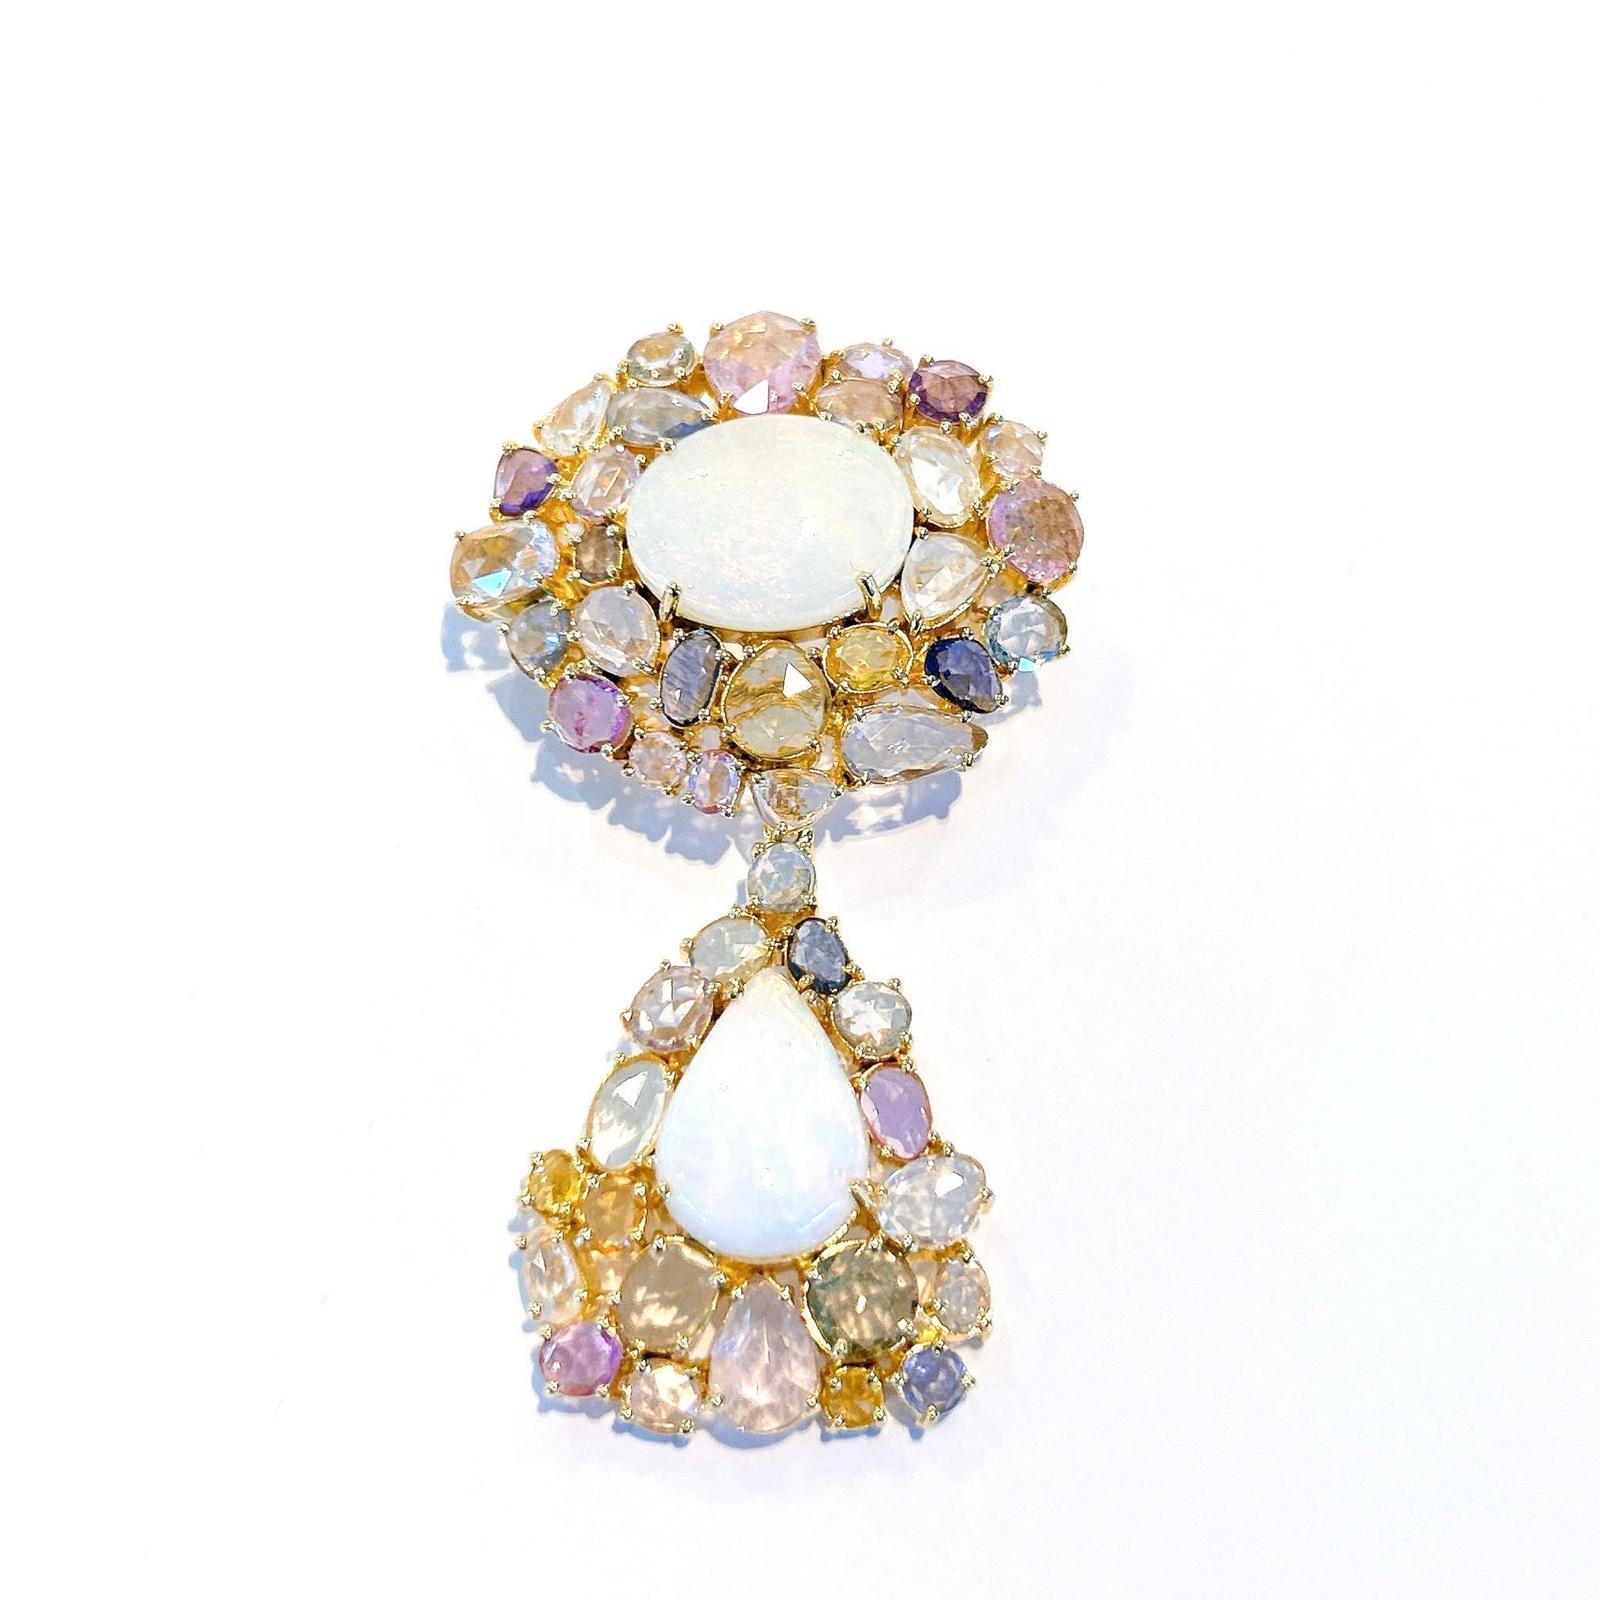 Bochic “Capri” Opal & Multi Fancy Rose Sapphires Pendent Set 18K Gold & Silver 
Rose Cut Sapphires 16 carats 
Colors: Rose, Pink, Purple, Yellow, Golden, Light Green, Lilac 
From Sri Lanka 
White Opal with Cream and Pink tones 
Cabochons shapes
The